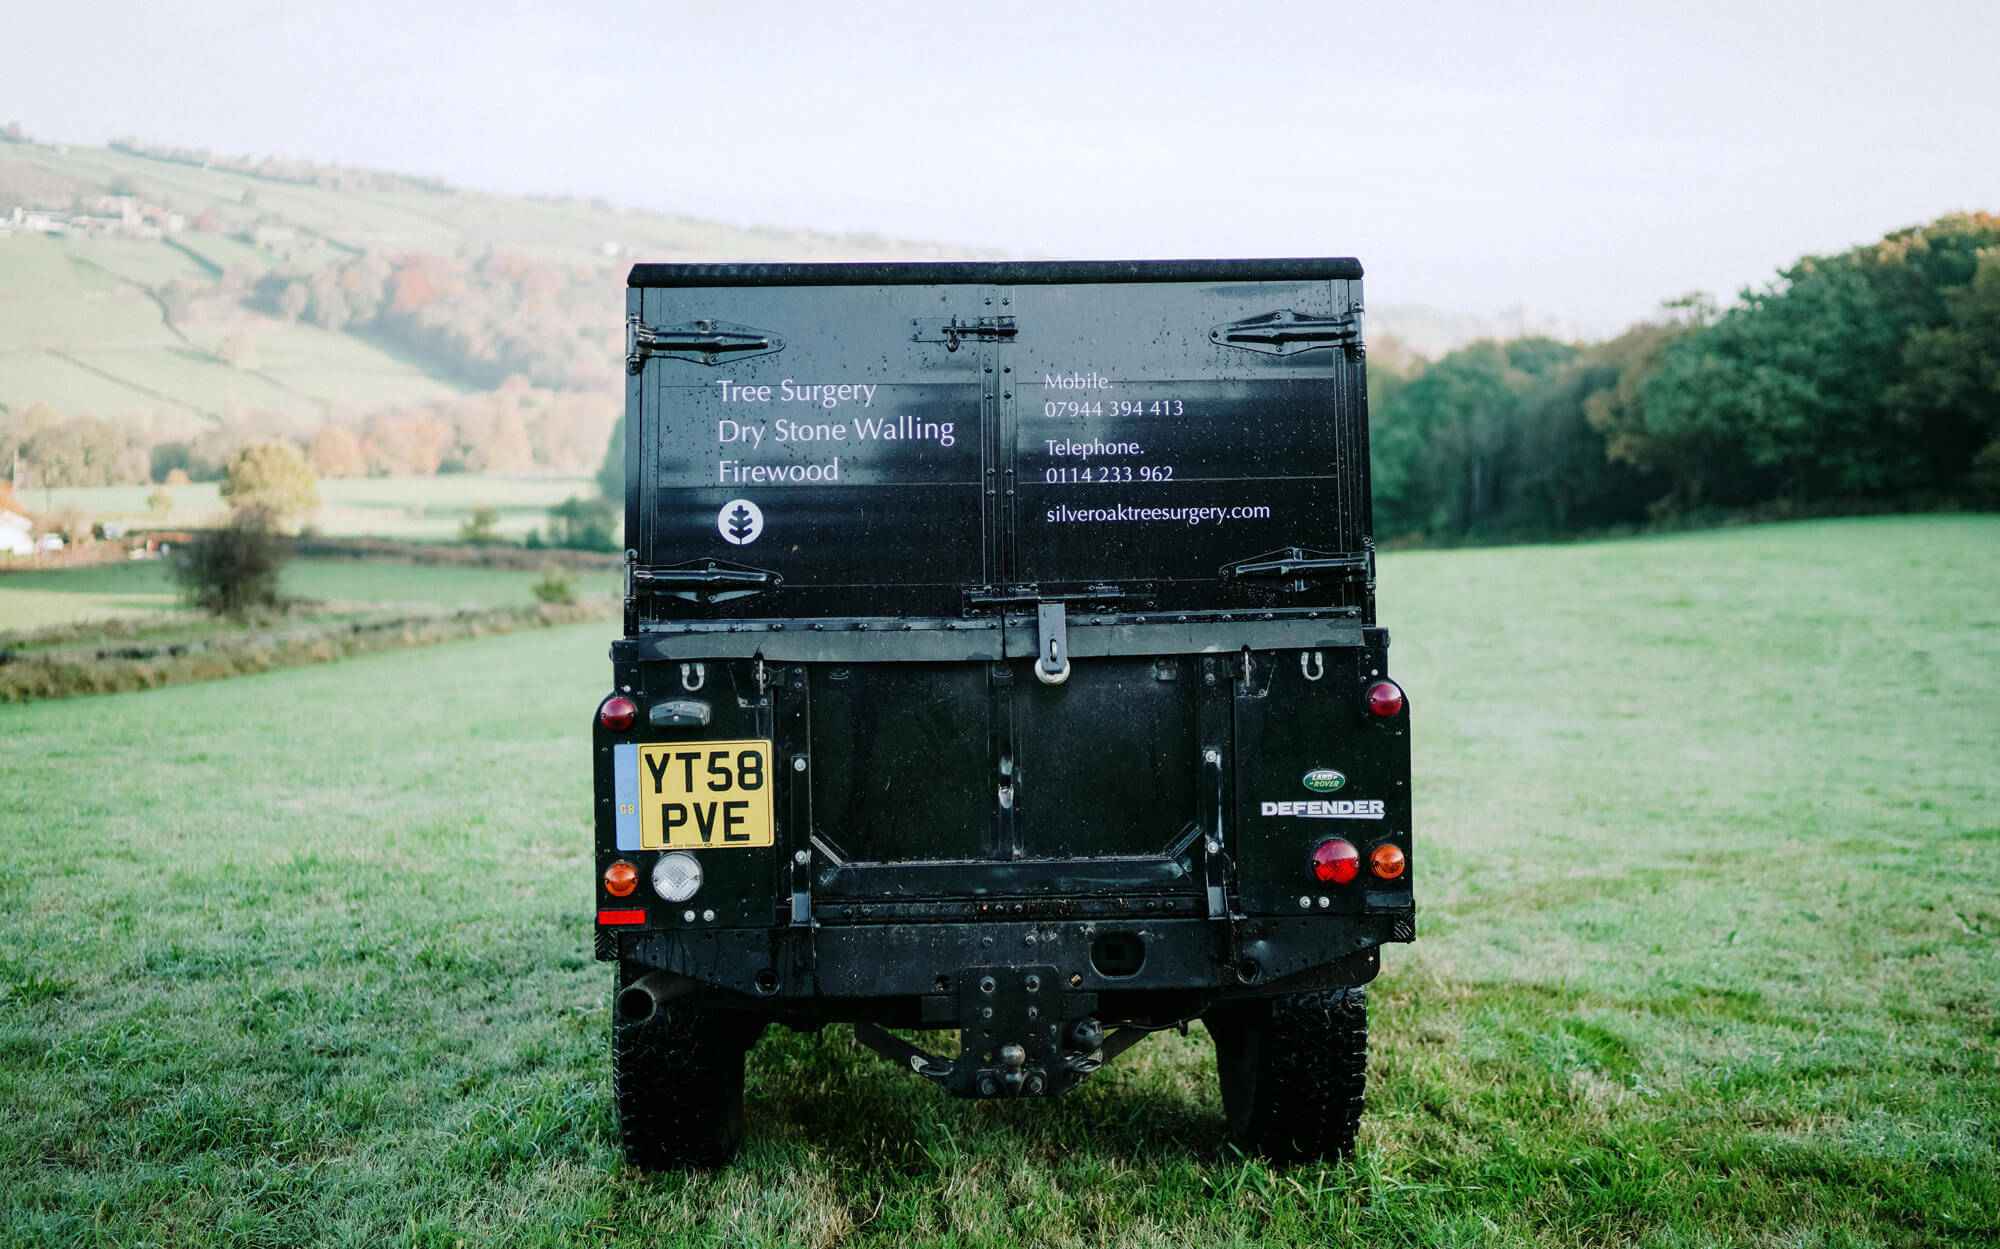 A photo of the back of the Silver Oak team Land Rover in Lodgemoor, Sheffield